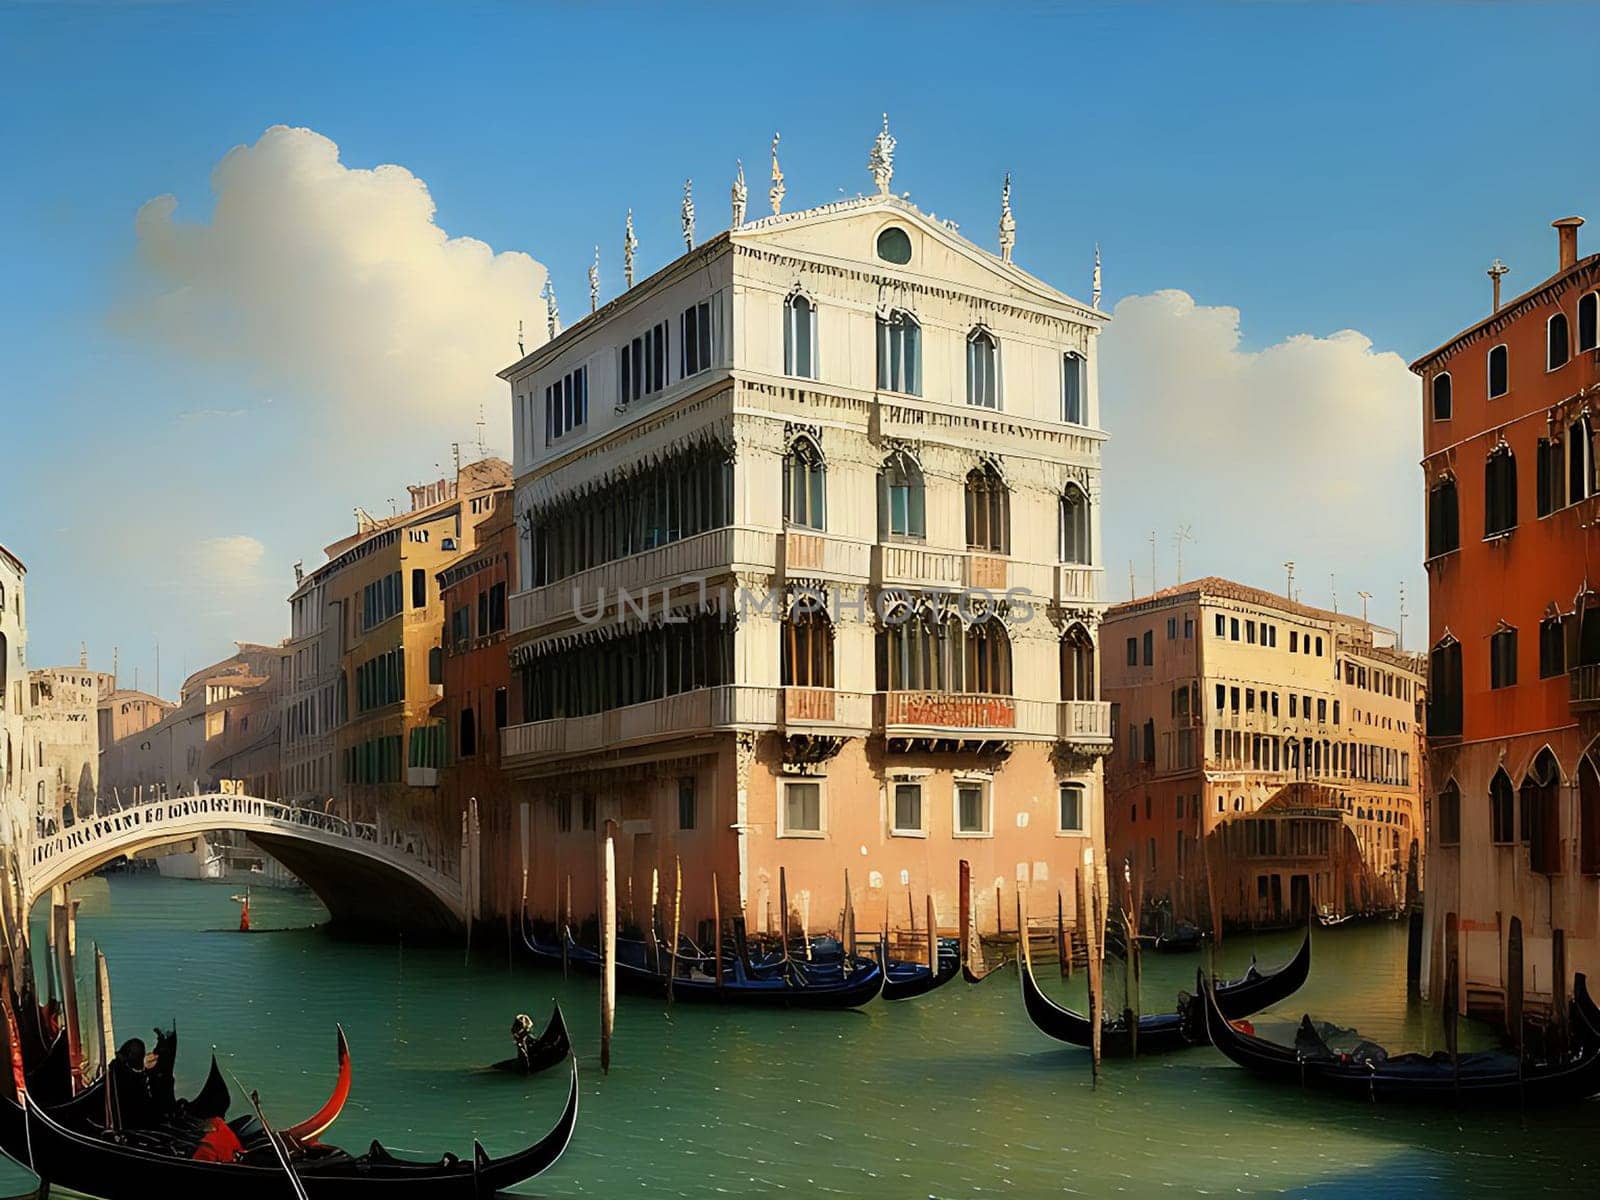 A mesmerizing scene unfolds on the iconic Grand Canal in Venice, Italy. Gondolas gracefully navigate the shimmering waters, framed by the elegant Rialto Bridge in the distance. This AI-generated view captures the essence of Venice, showcasing the city's timeless beauty and enchanting atmosphere. The tranquil canal serves as a captivating stage where gondoliers skillfully steer their boats, transporting passengers on a romantic and unforgettable Venetian serenade.